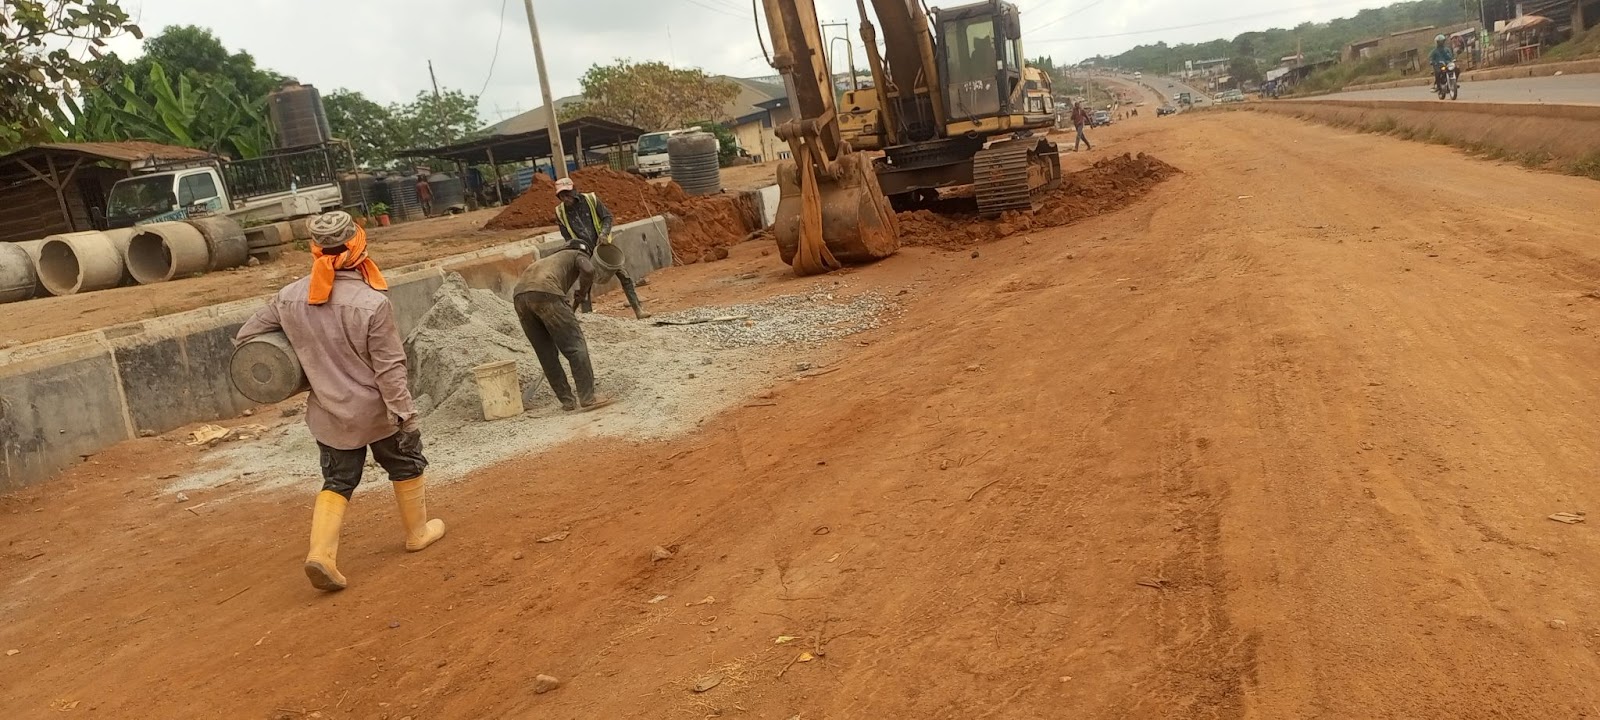 Despite the Release of N1.4 billion for Abeokuta-Ajebo Road Construction, Contractor still working on drainages